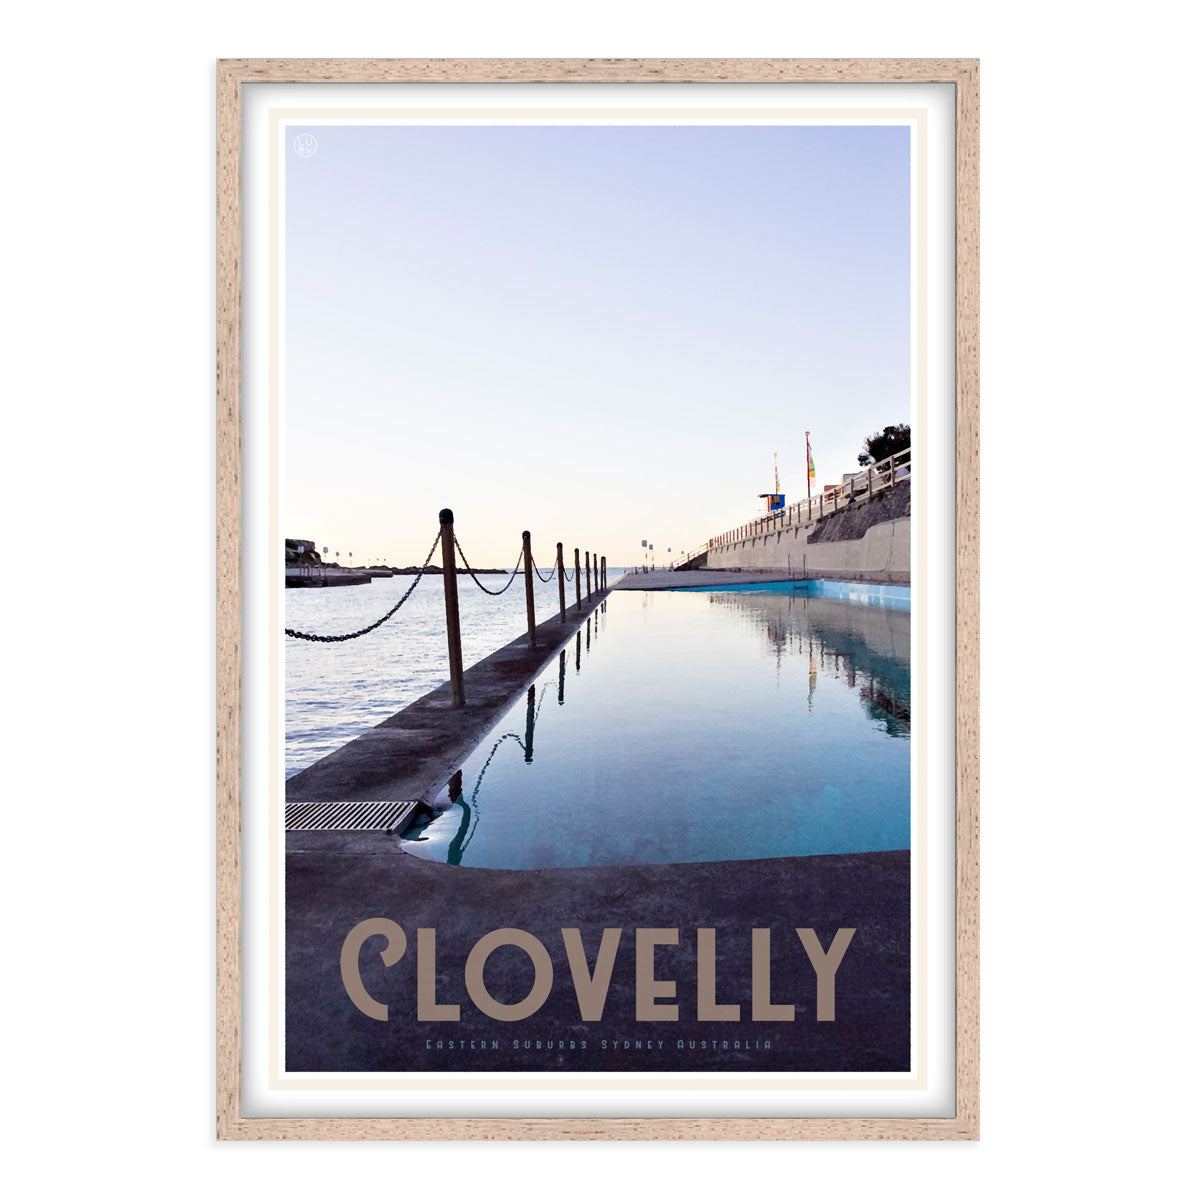 Clovelly vintage travel style oak framed print by places we luv